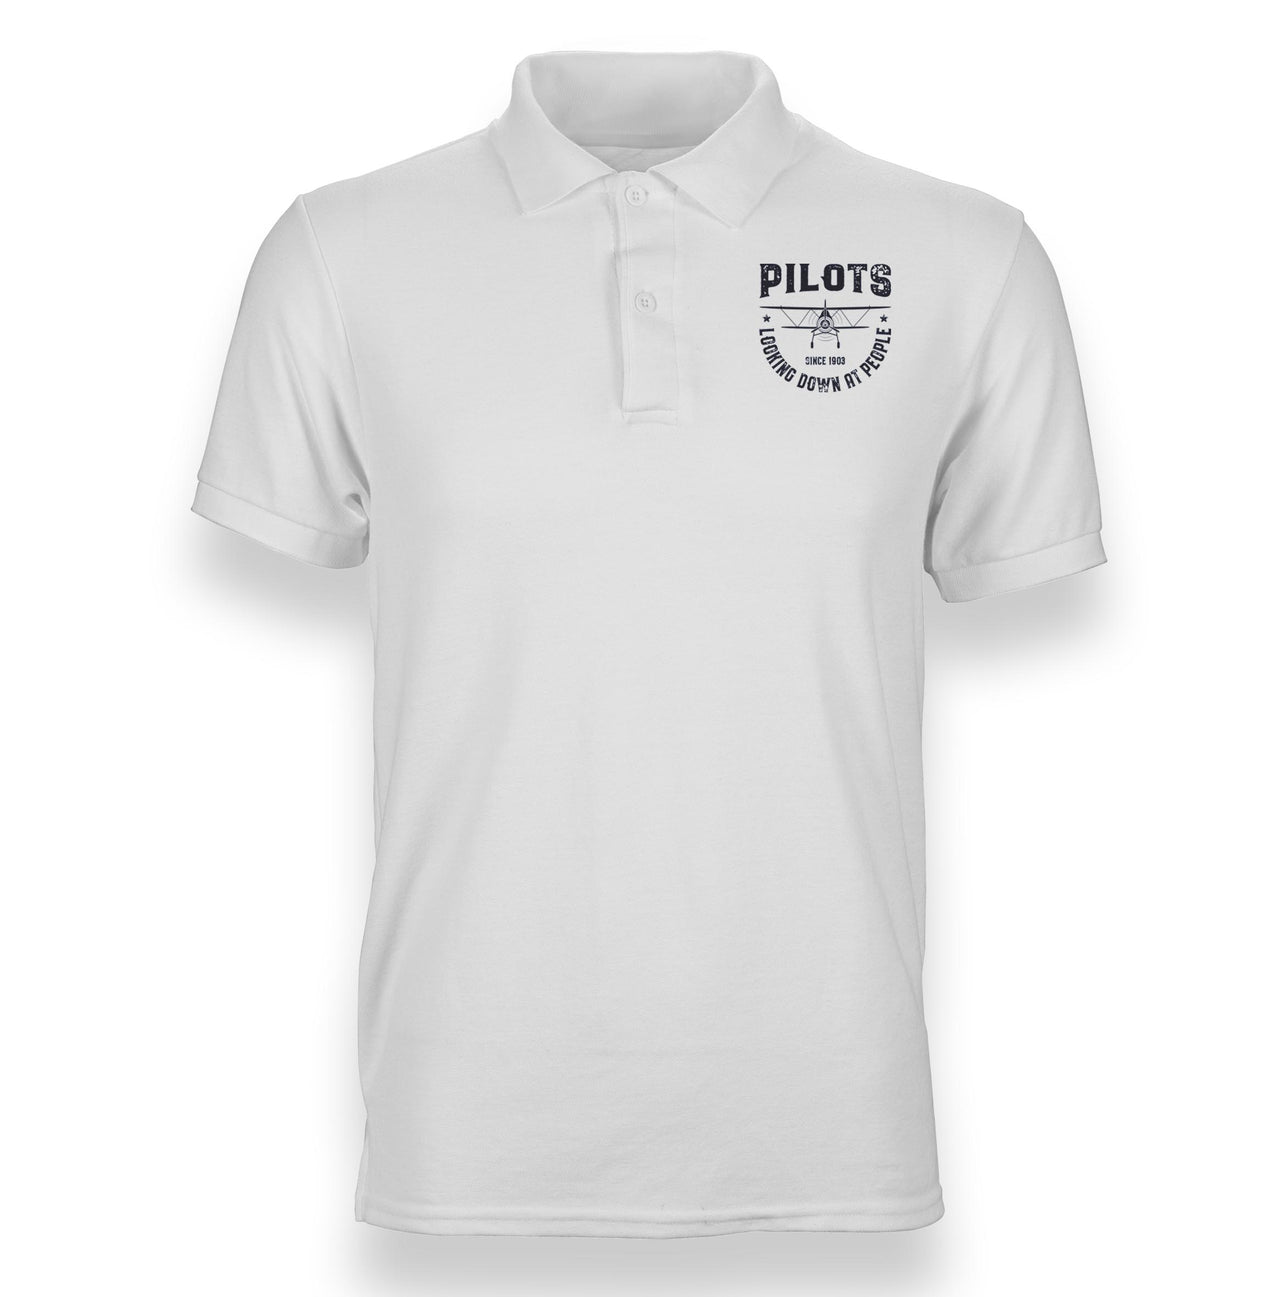 Pilots Looking Down at People Since 1903 Designed Polo T-Shirts